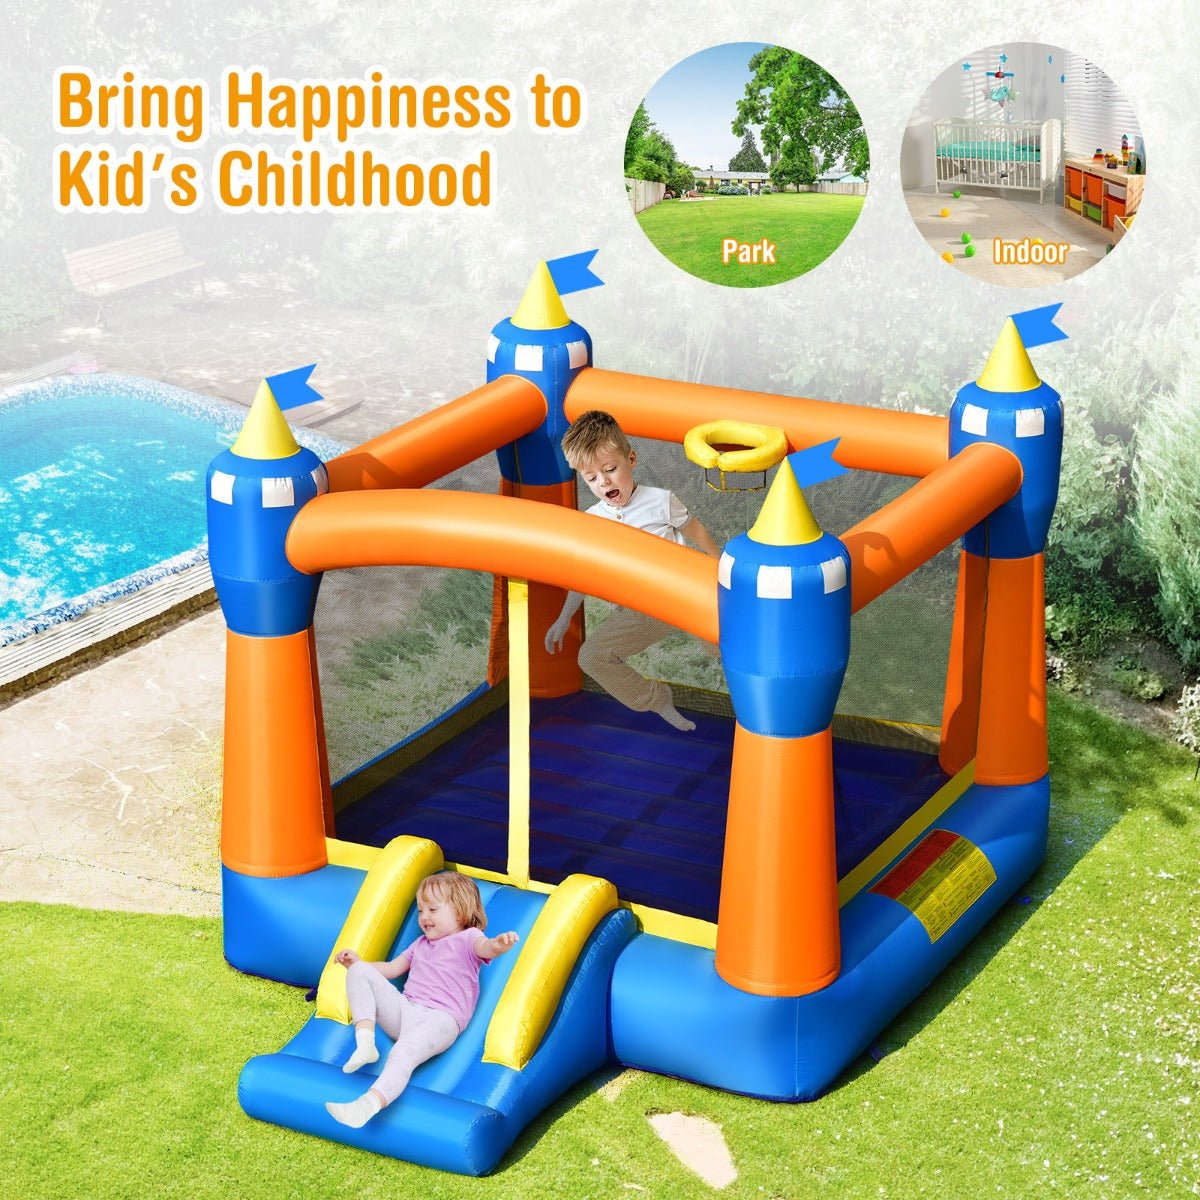 Kids Bounce House with Slide & Basketball Hoop - Inflatable Fun (No Blower)